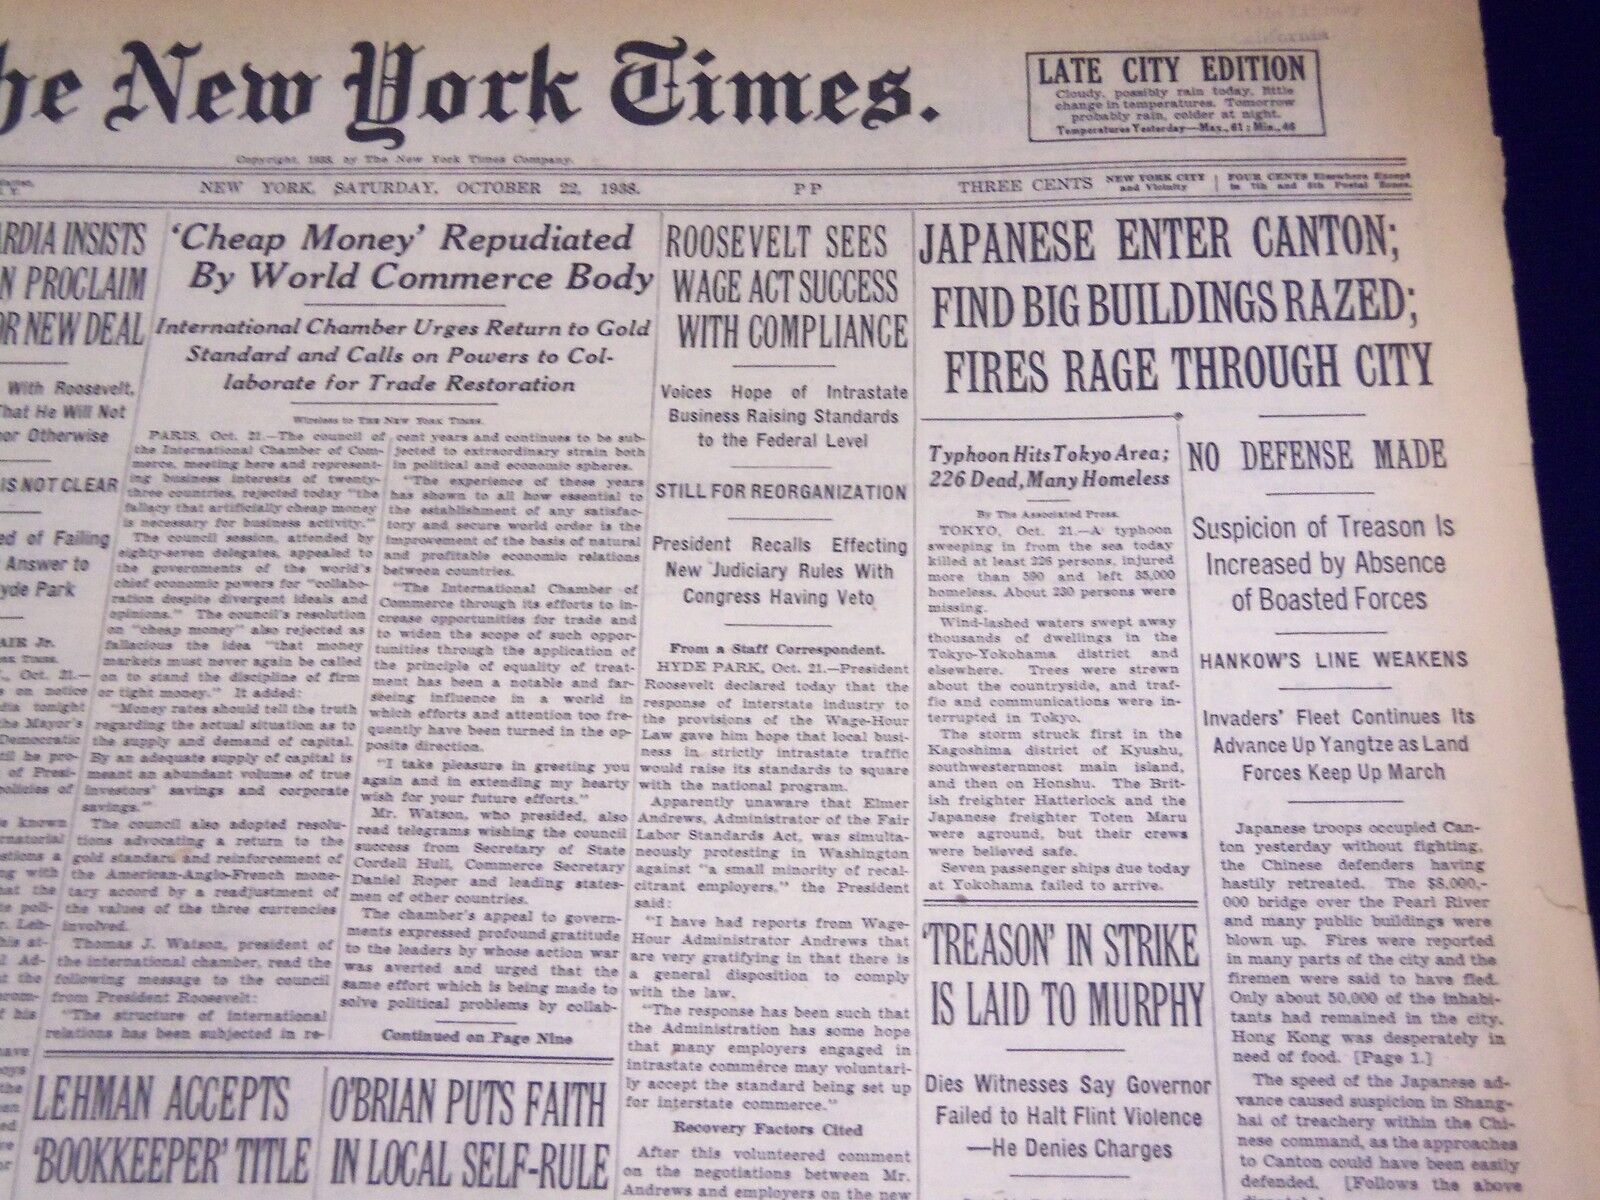 1938 OCT 22 NEW YORK TIMES - JAPANESE ENTER CANTON, FIRES RAGE IN CITY - NT 697